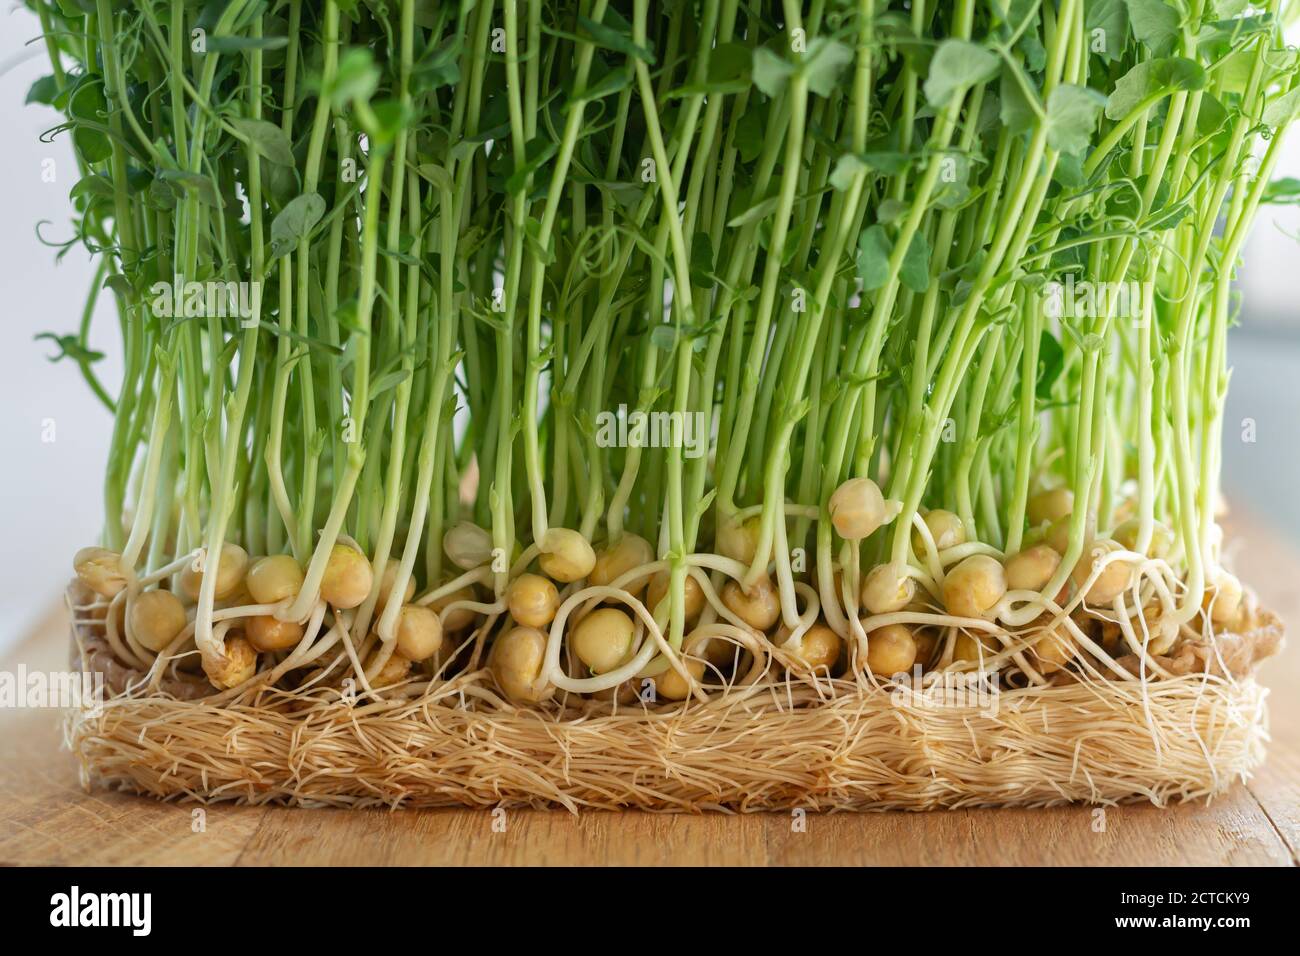 Healthy microgreen sprouts germinated from organic peas seeds close-up Stock Photo